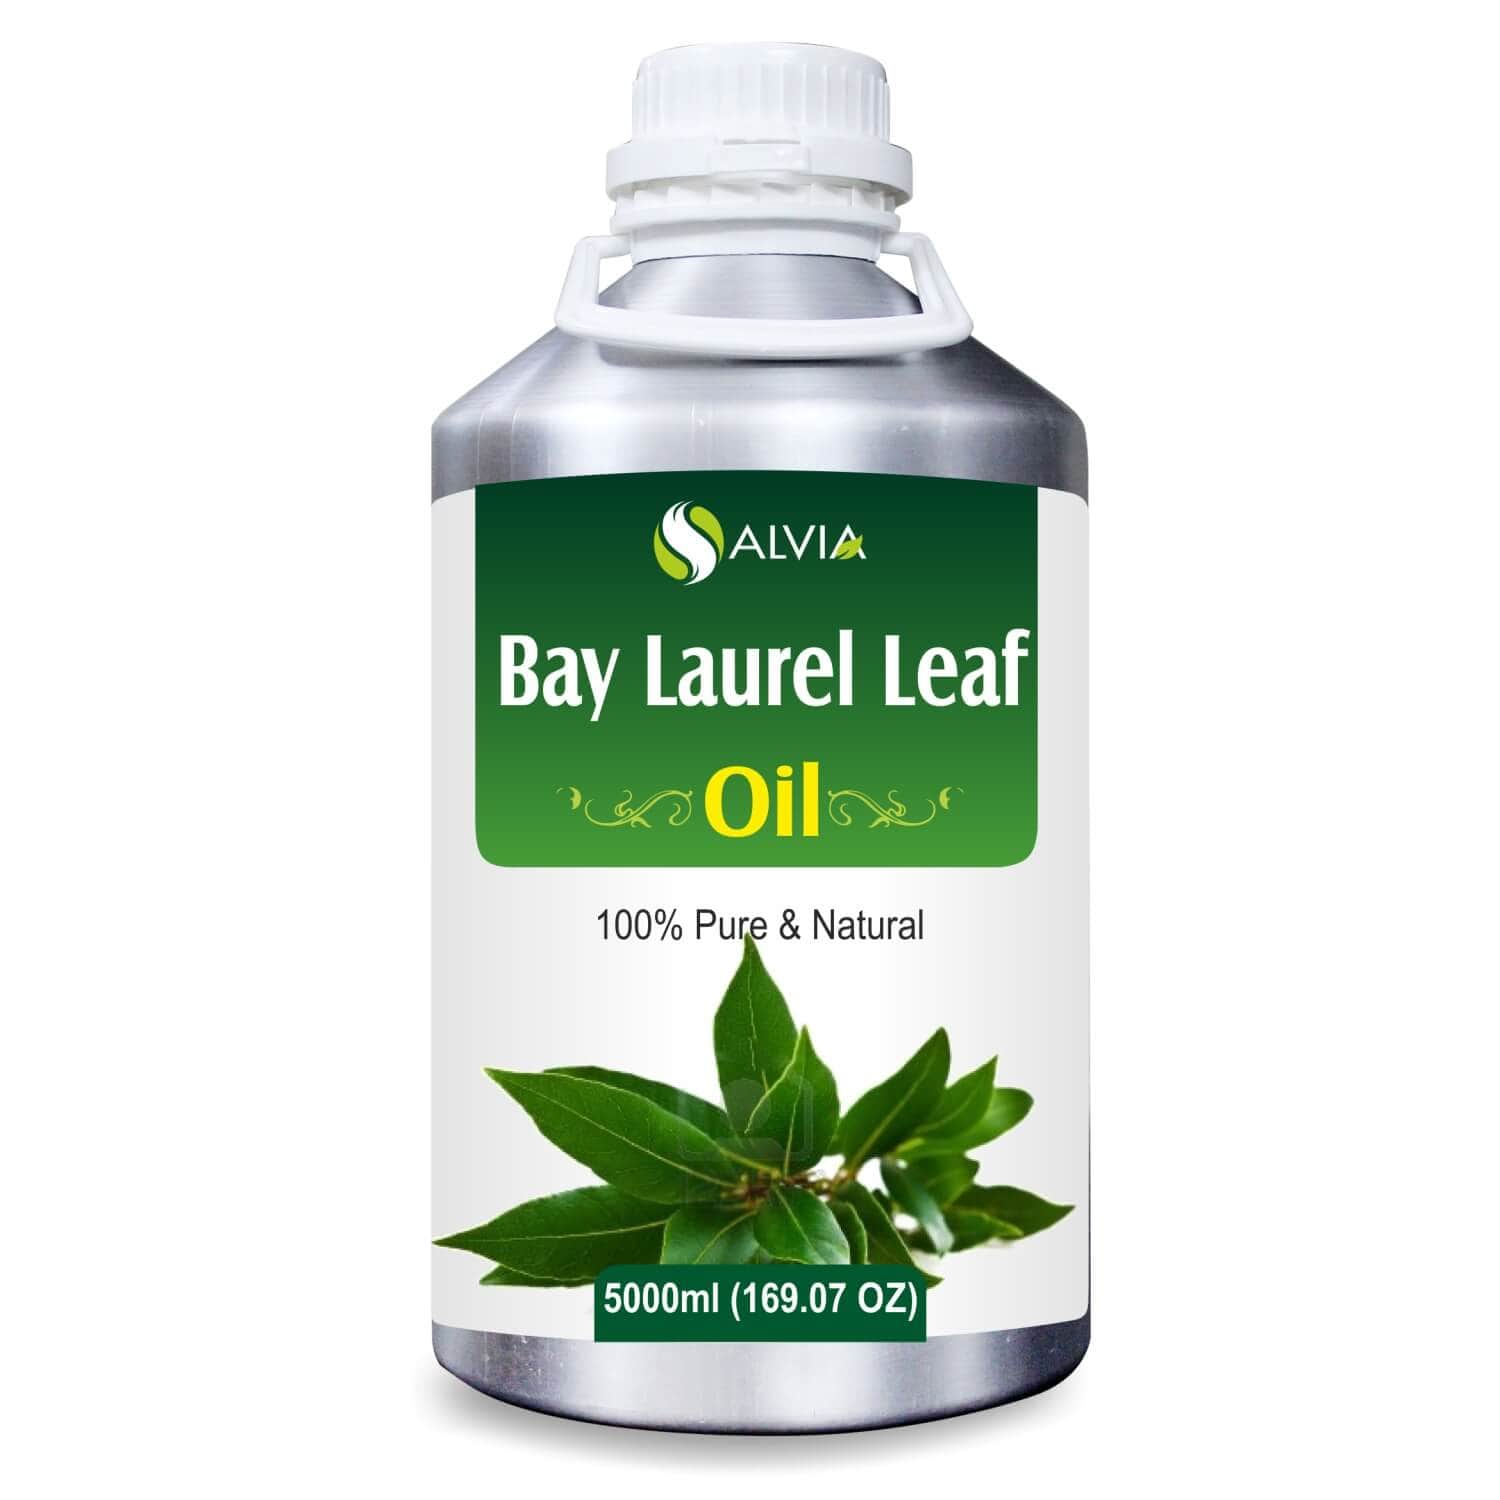 Salvia Natural Essential Oils 5000ml Bay Laurel Leaf Oil (Laurus nobilis) 100% Natural Pure Undiluted Uncut Essential Oil Offers Pain Relief, Helps To Heal Wounds, Promotes Hair Growth